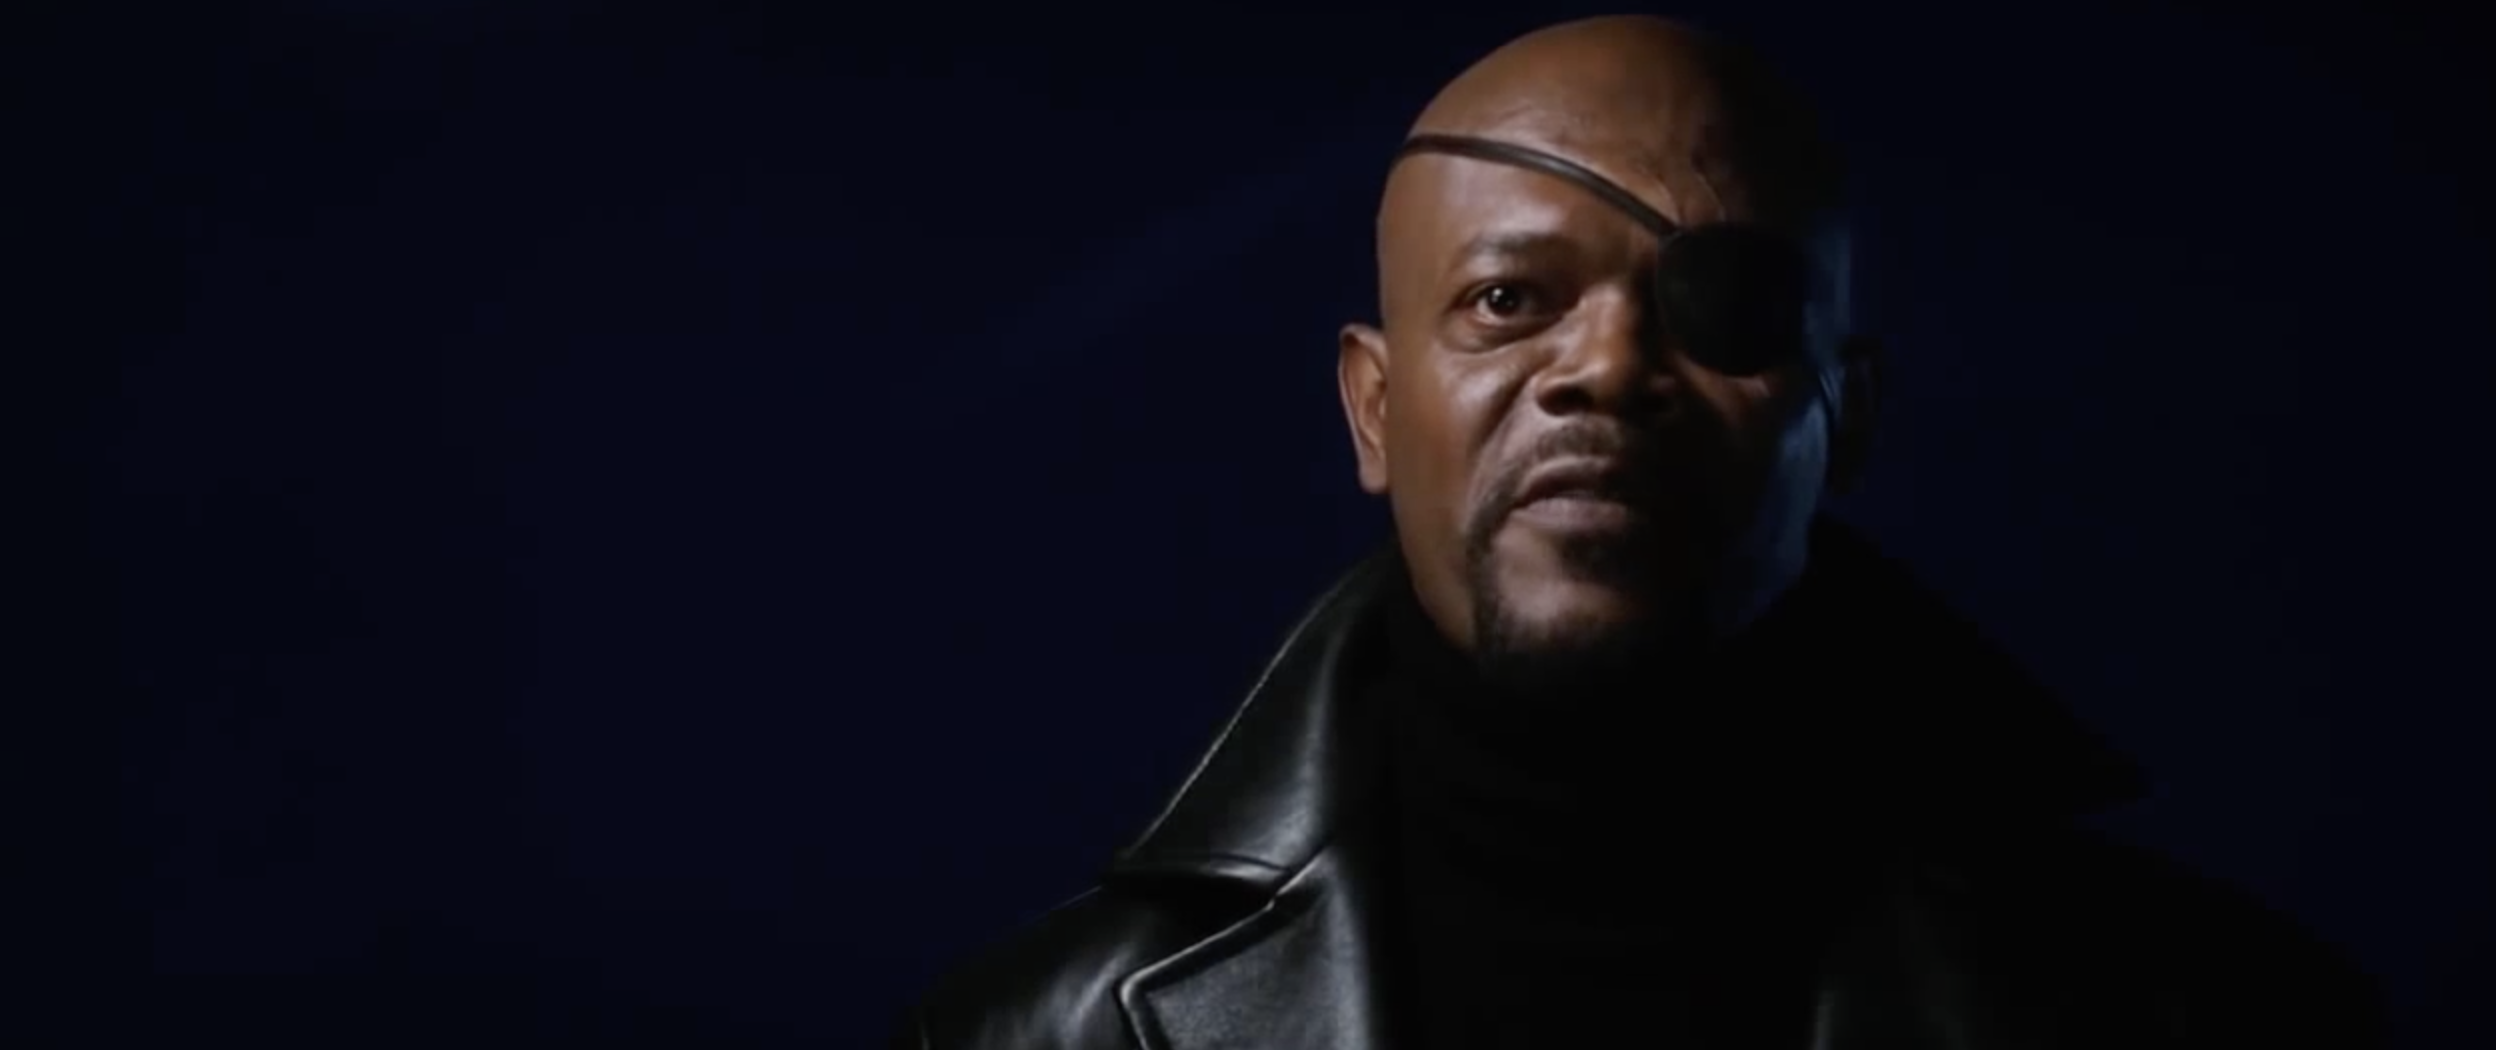 nick fury stares at the camera, his face in shadow